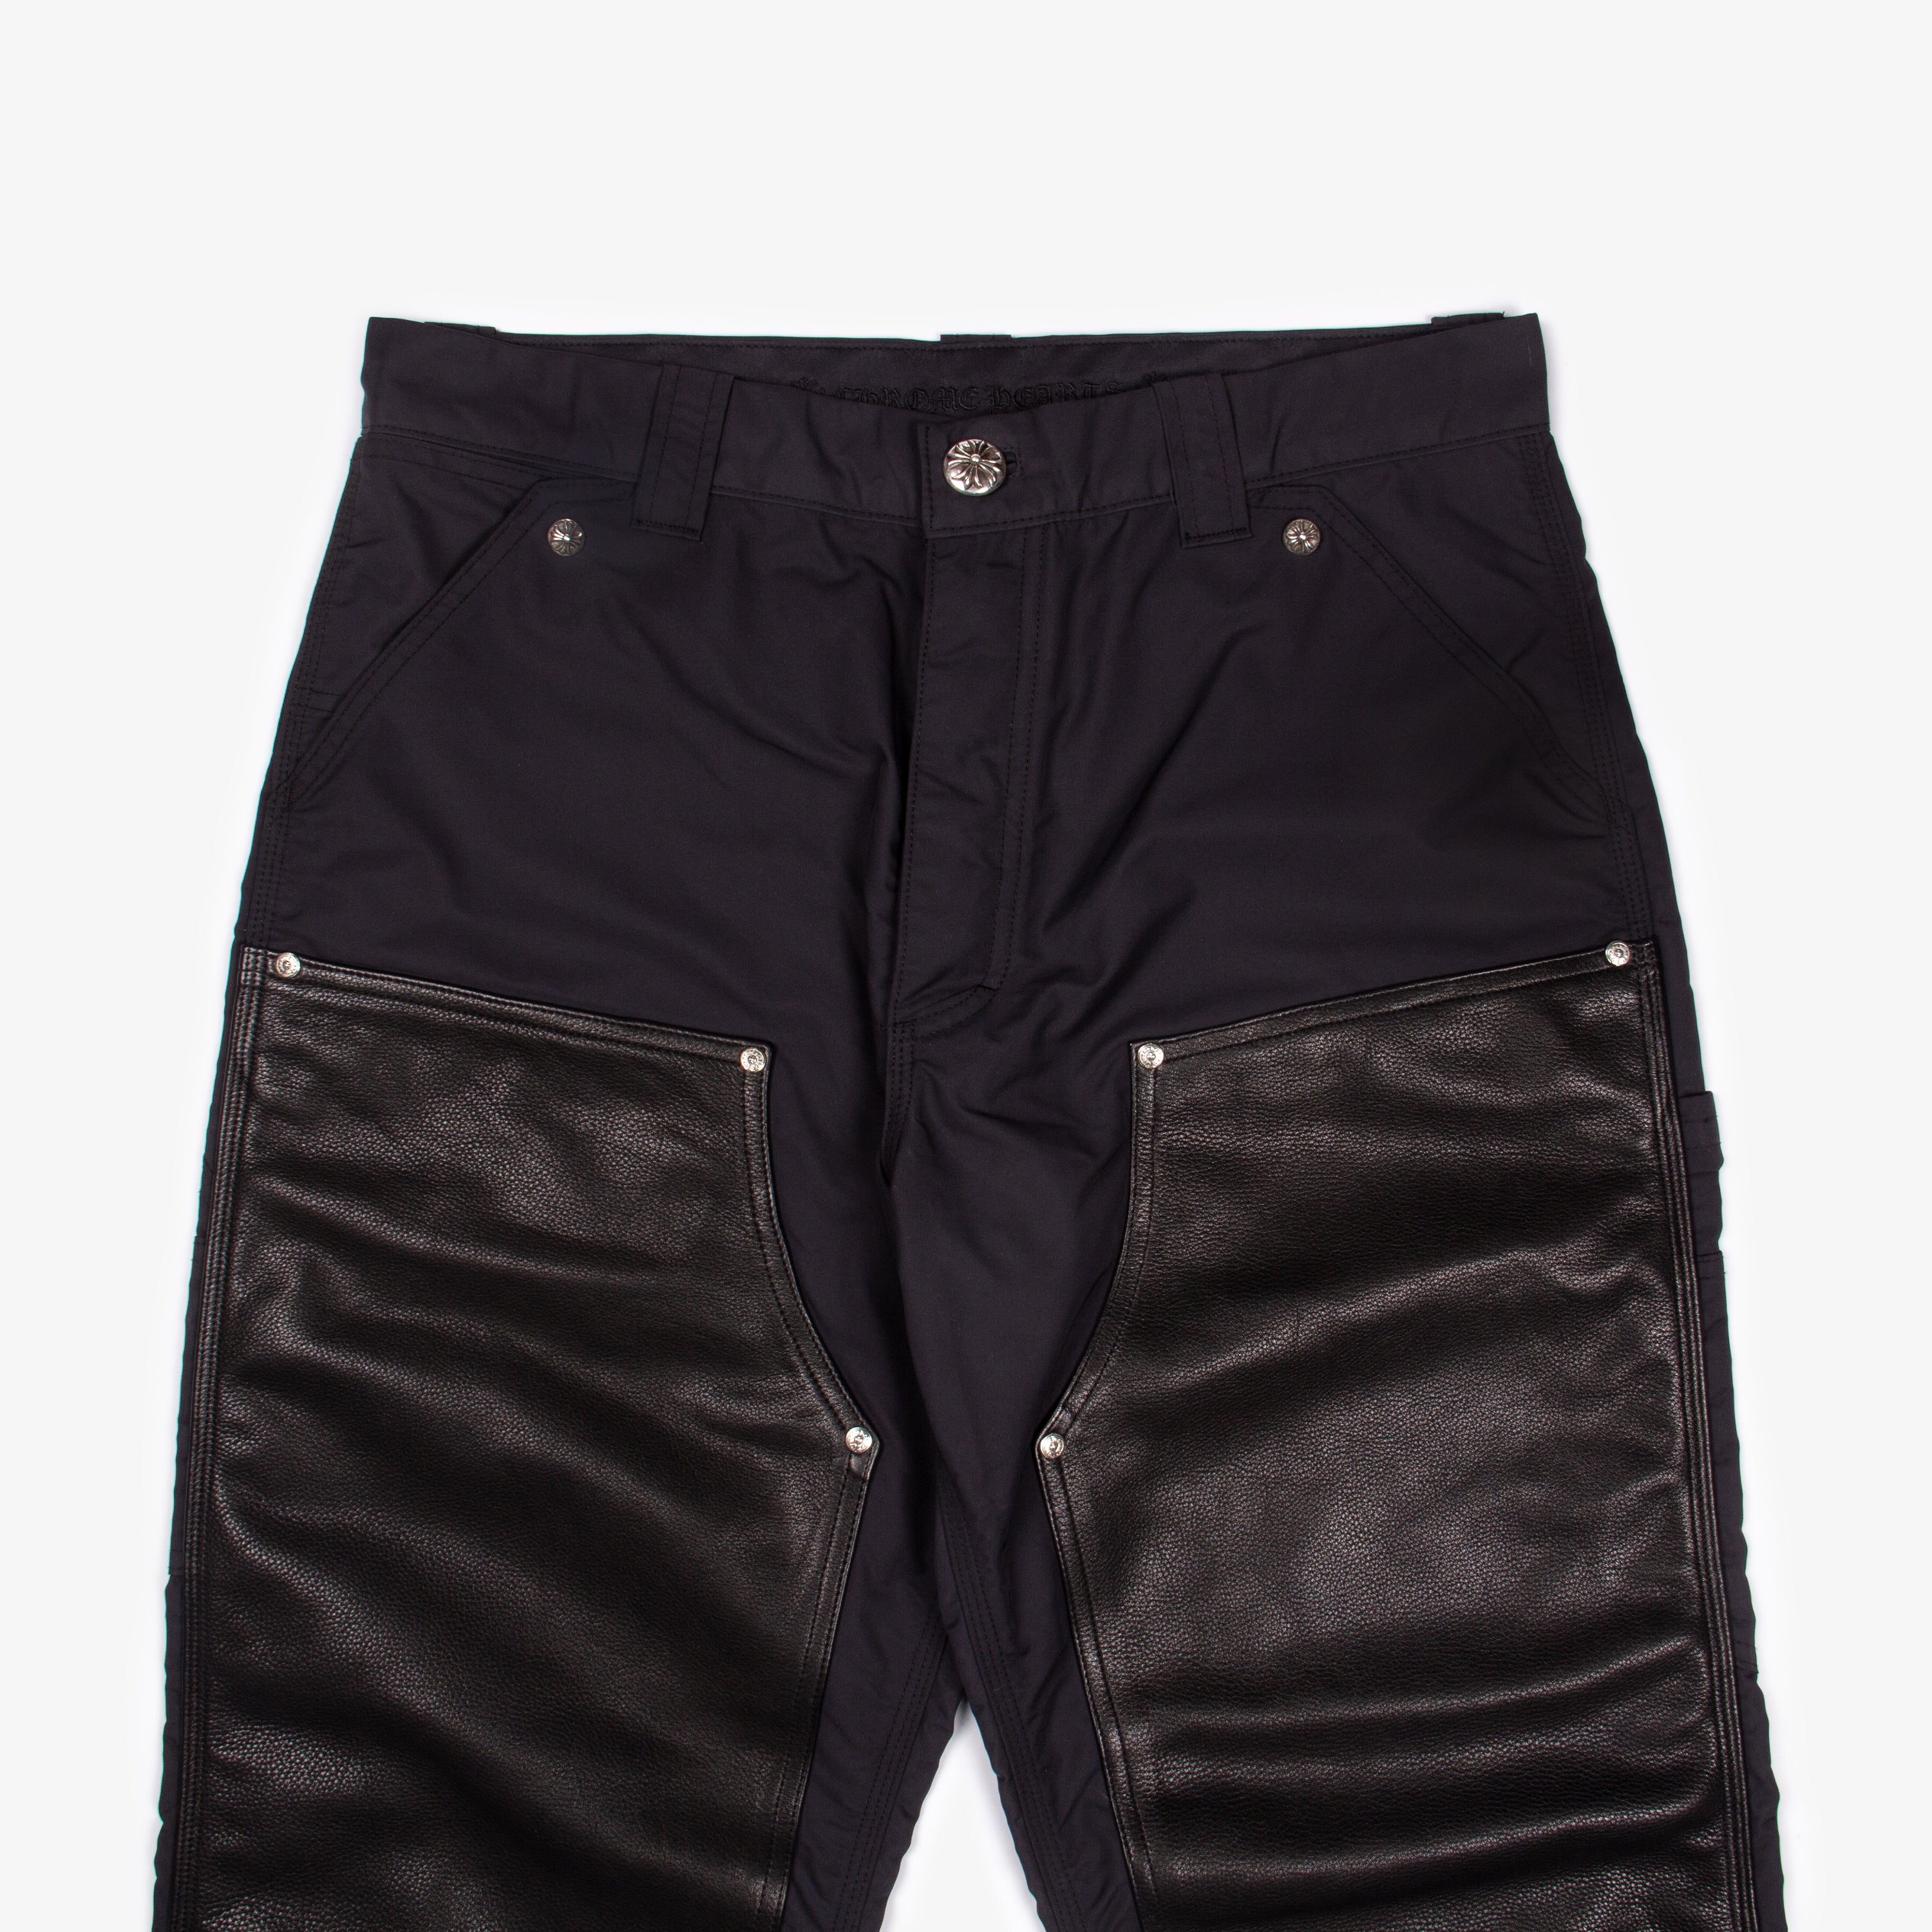 LEATHER KNEE CROSS PATCH CARPENTER PANT